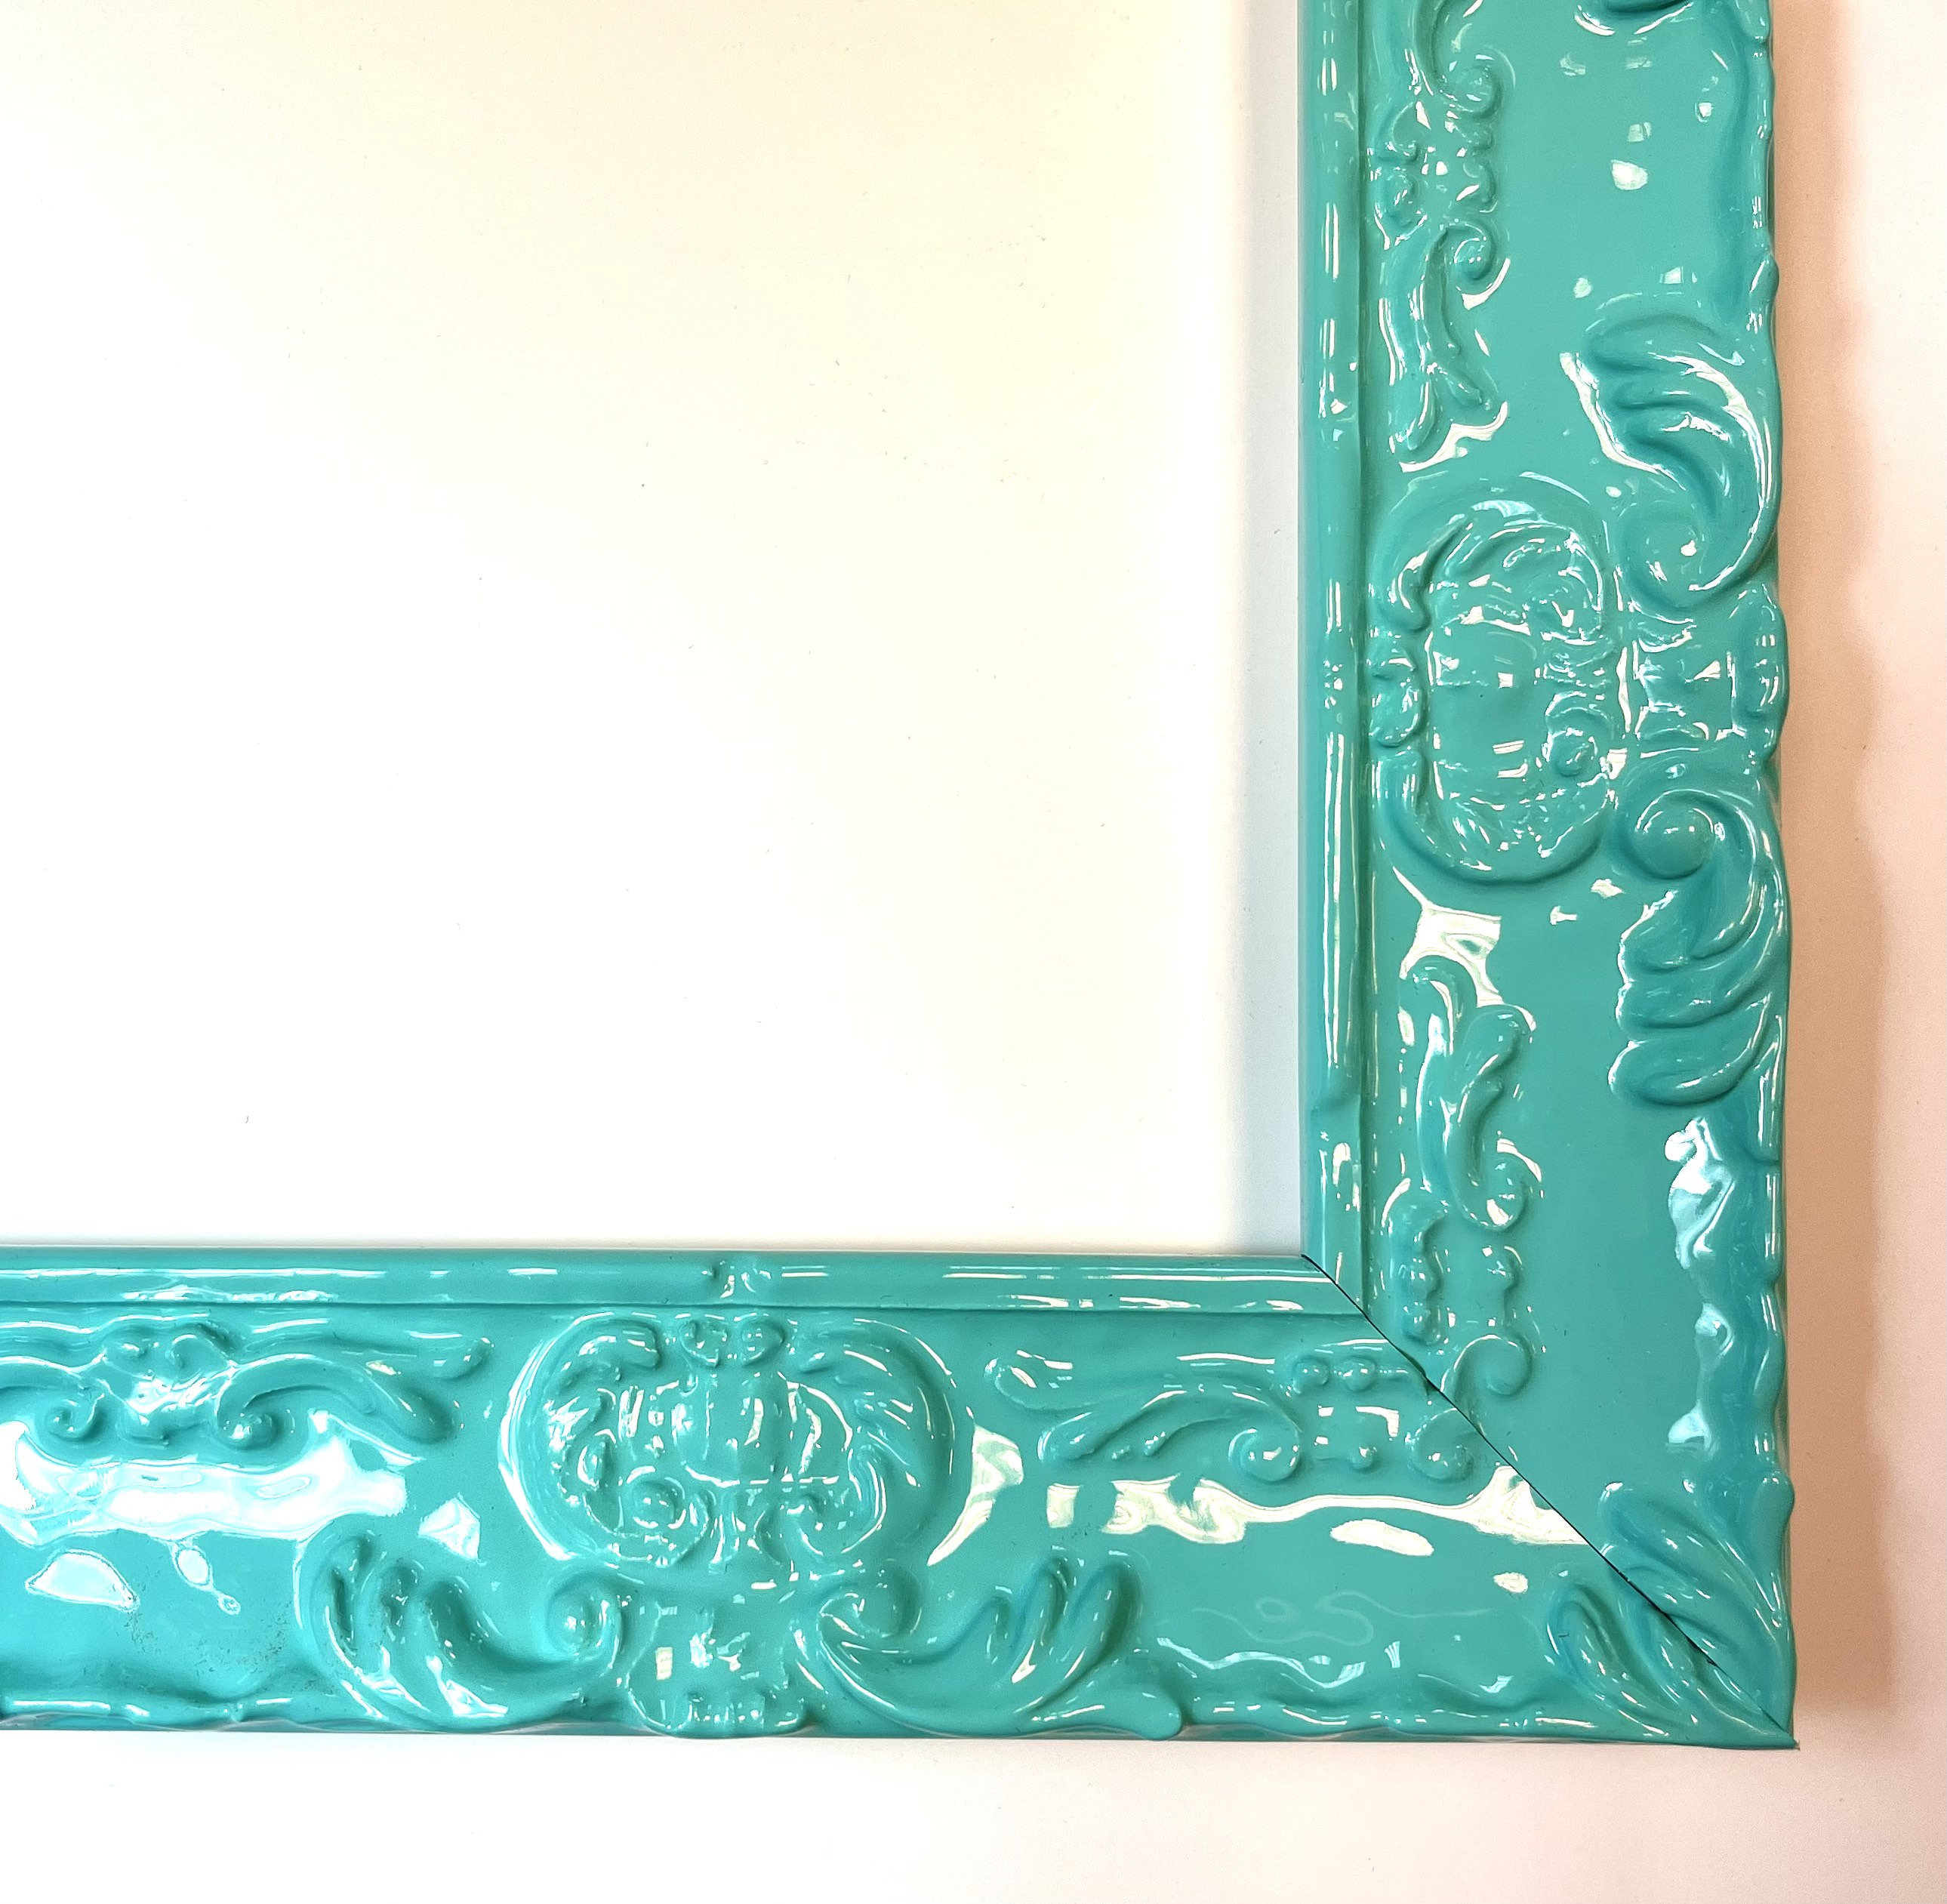 16x20 Ornate Aqua Picture Frame, Wall Colorful Frame for Artwork, Canvas,  Print